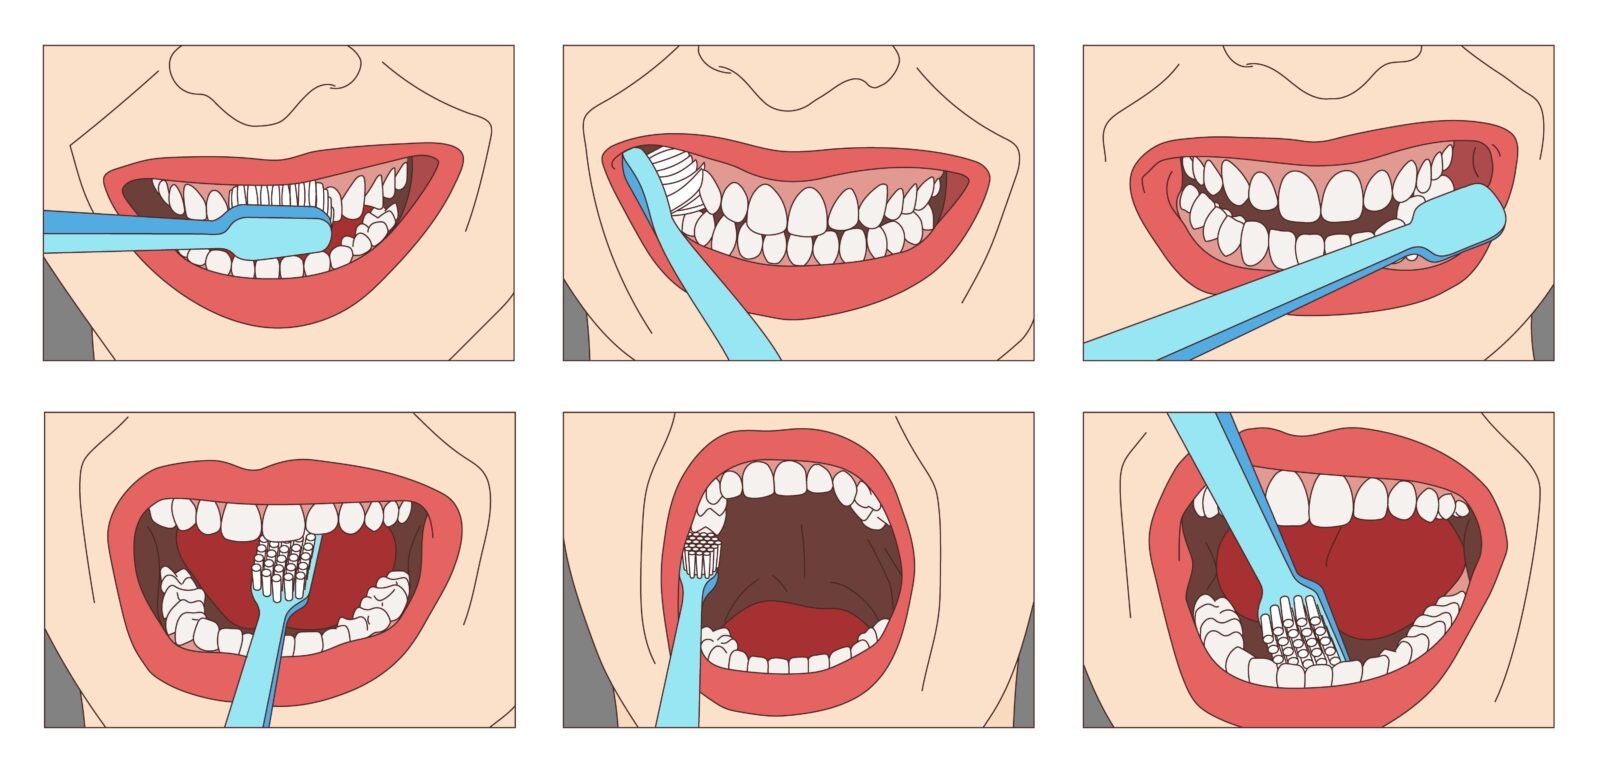 six images showing the step by step process on how to brush your teeth